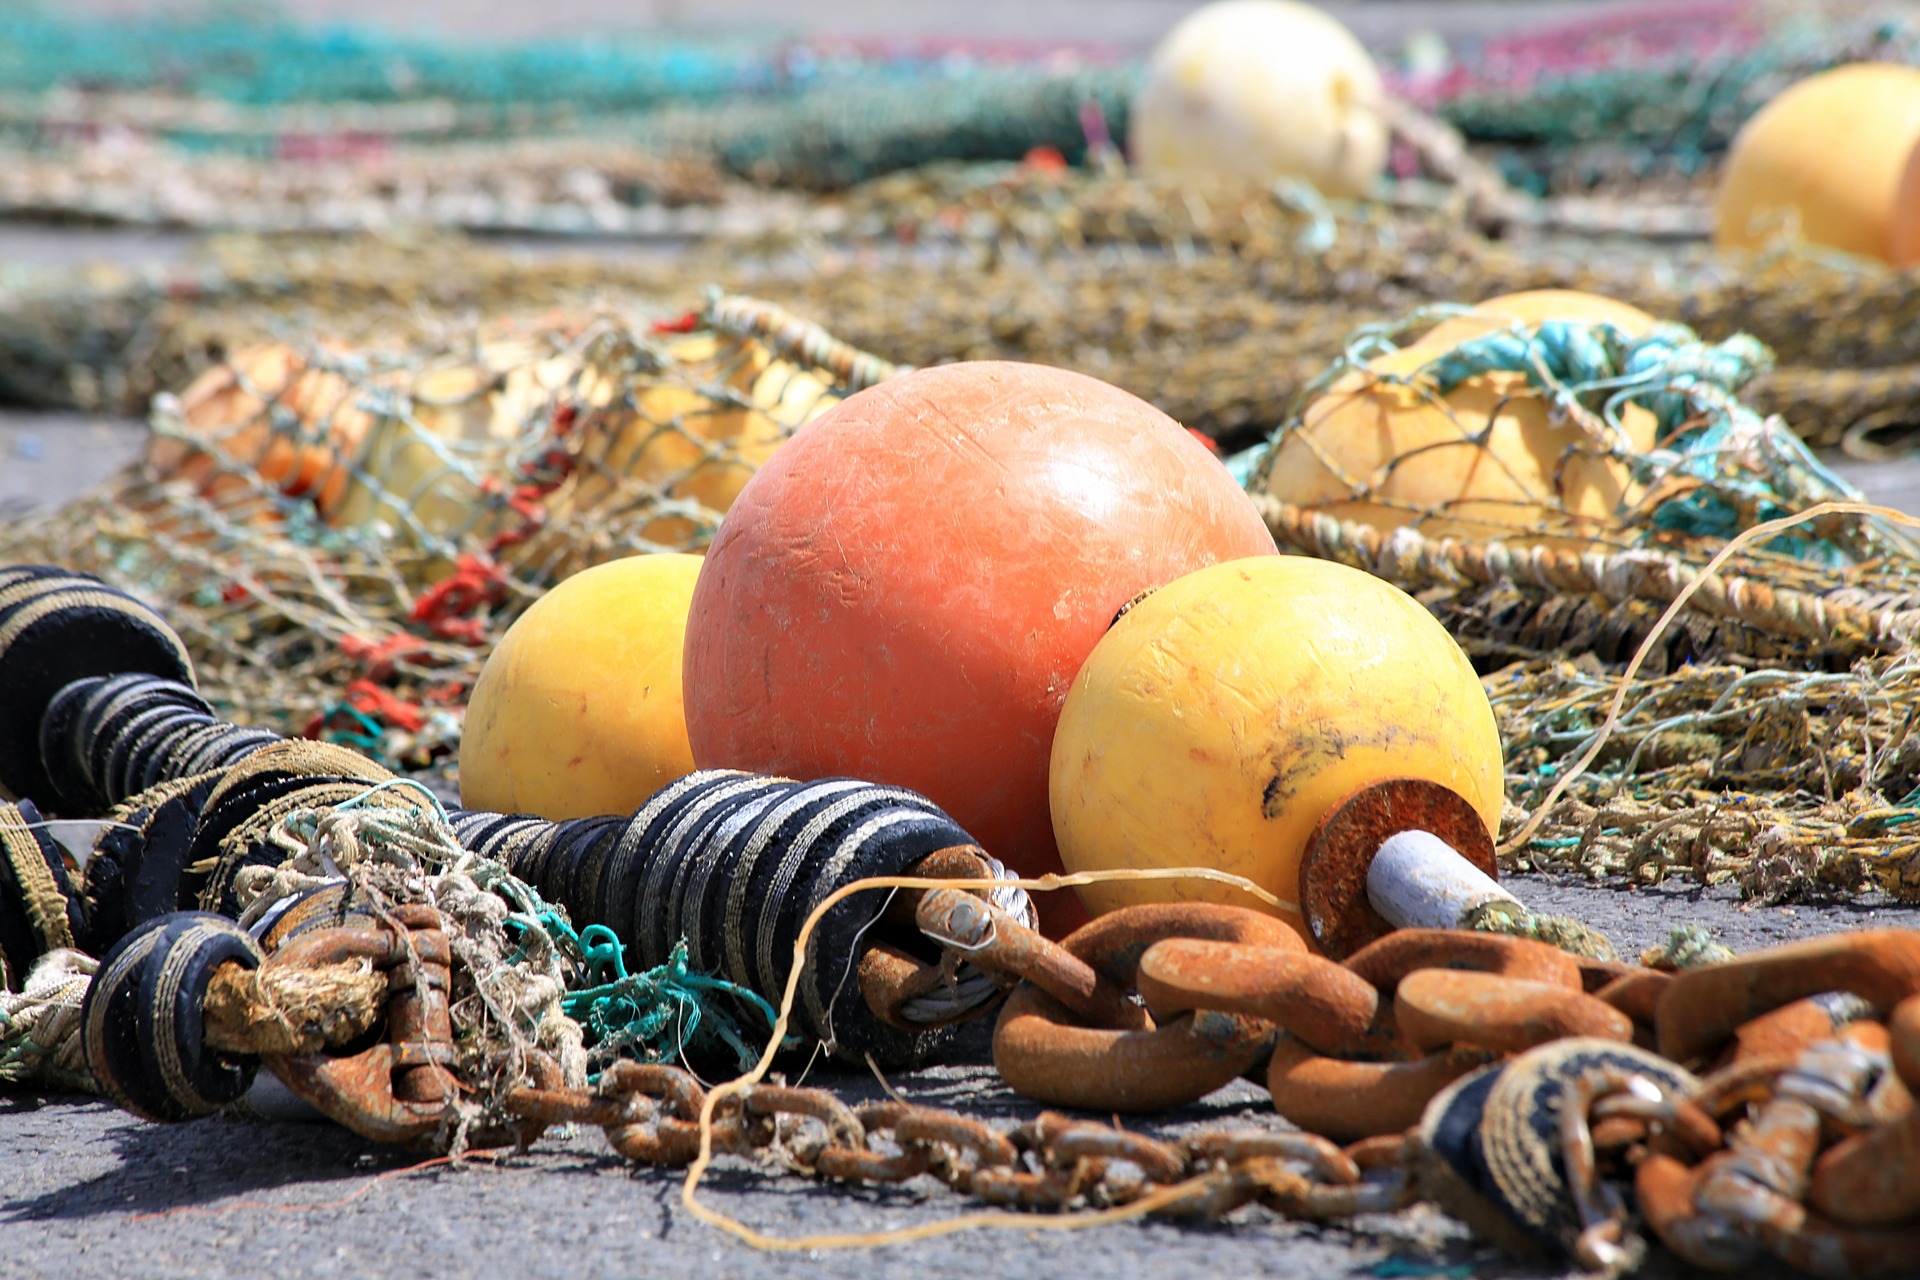 For fishing gear, which accounts for 27% of all beach litter, the Commission aims to complete the existing policy framework with producer responsibility schemes for fishing gear containing plastic. Producers of plastic fishing gear will be required to cover the costs of waste collection from port reception facilities and its transport and treatment. They will also cover the costs of awareness-raising measures.